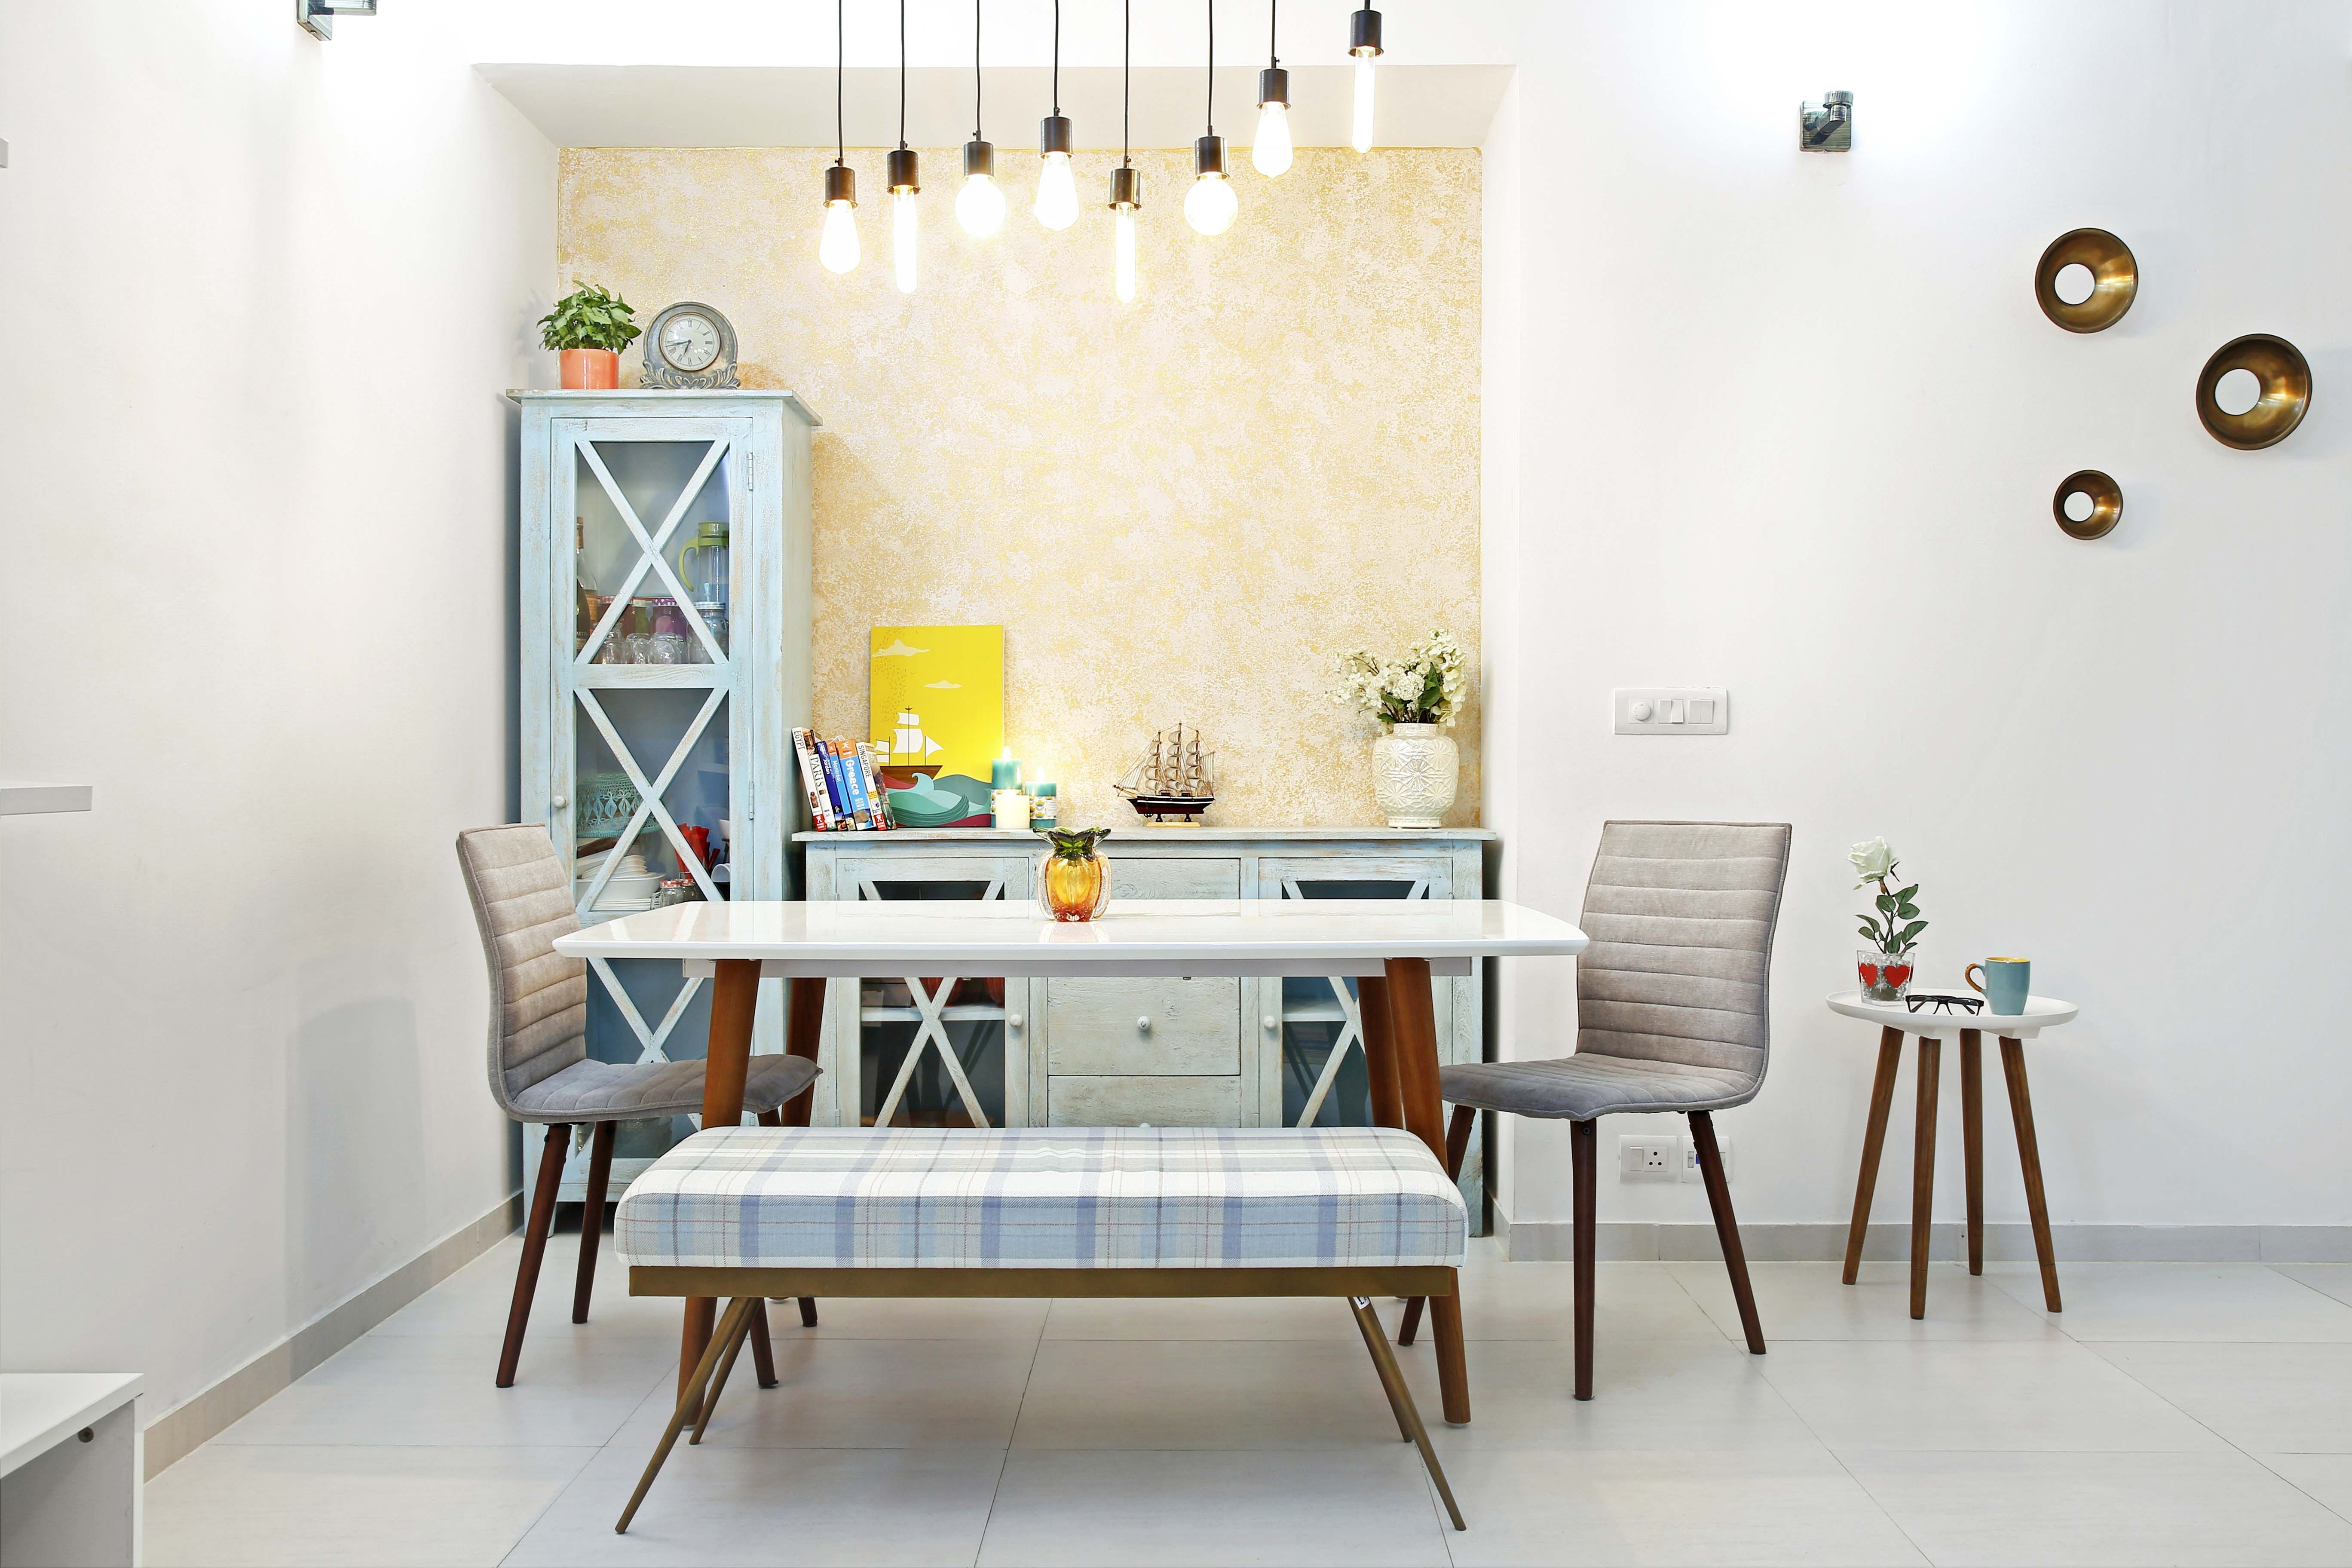 Modern 4-Seater Dining Room Design With A Crockery Unit